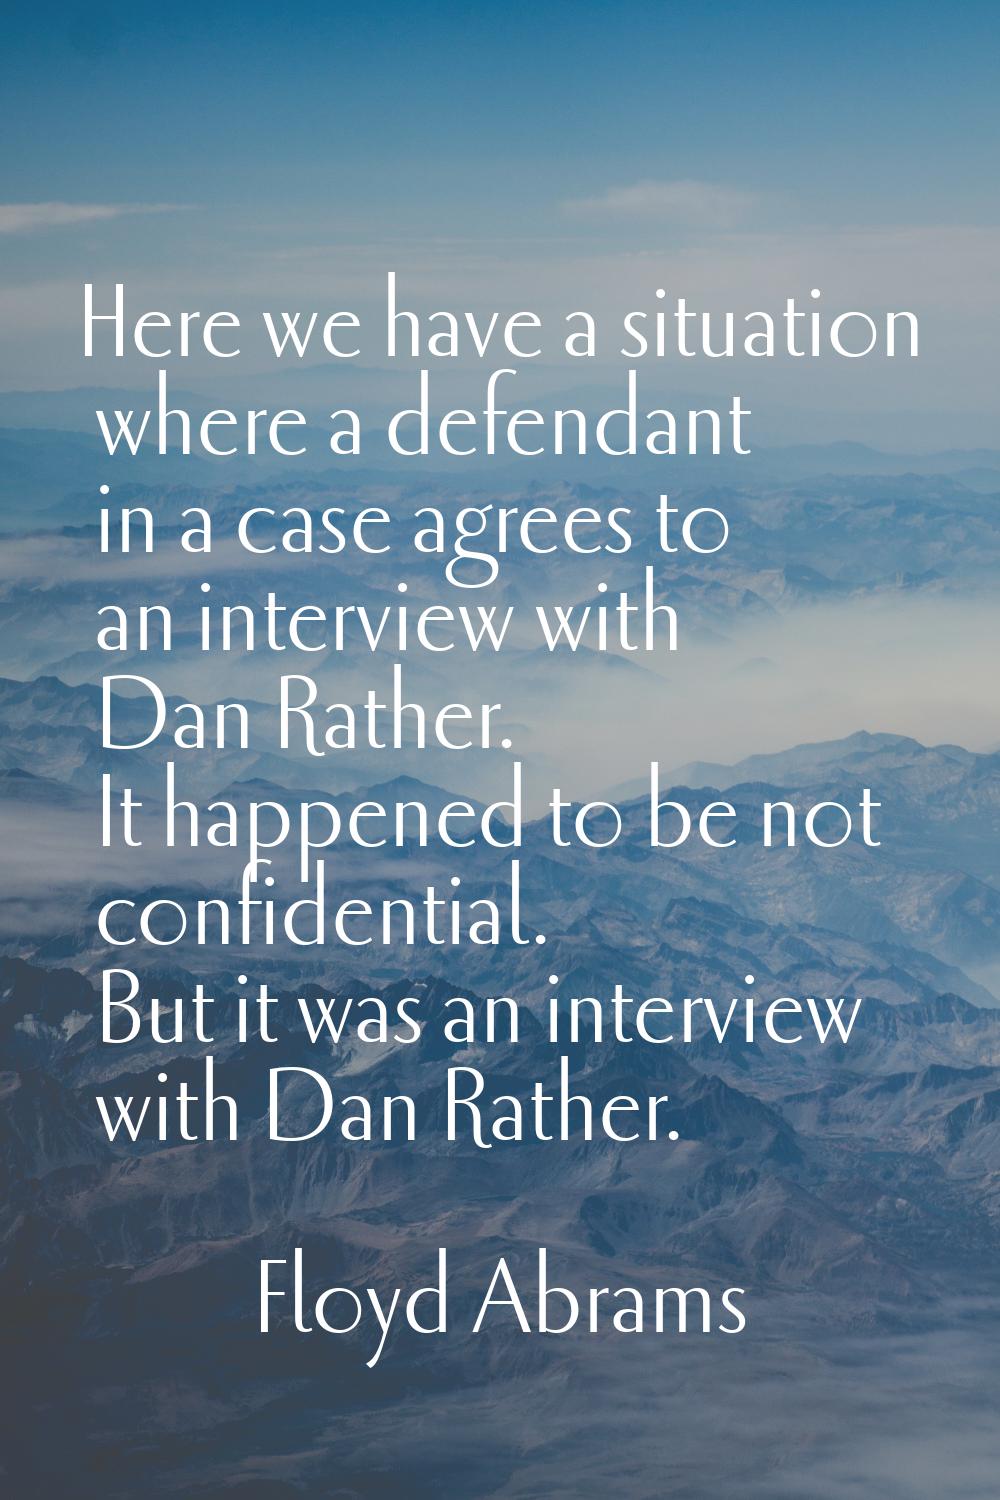 Here we have a situation where a defendant in a case agrees to an interview with Dan Rather. It hap